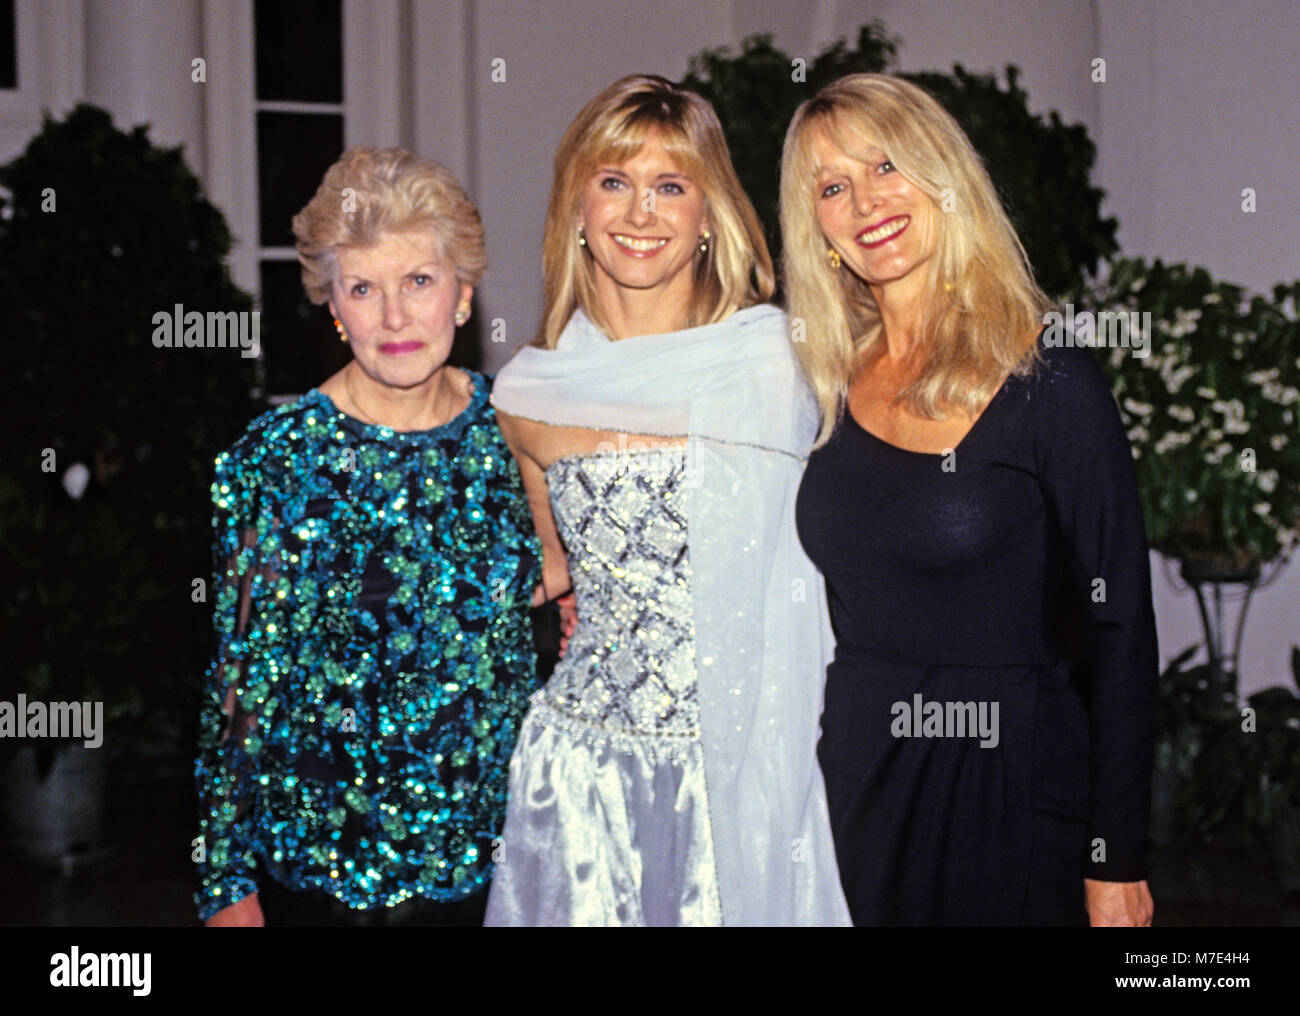 Australian singer, songwriter and actress Olivia Newton-John, center, arrives for the State Dinner hosted by United States President George H.W. Bush and first lady Barbara Bush honoring President V·clav Havel of Czechoslovakia at the White House in Washington, DC with her mother, Irene Newton-John, left, and sister, Rona Newton-John, right, on October 22, 1991. Credit: Ron Sachs / CNP/MediaPunch Stock Photo